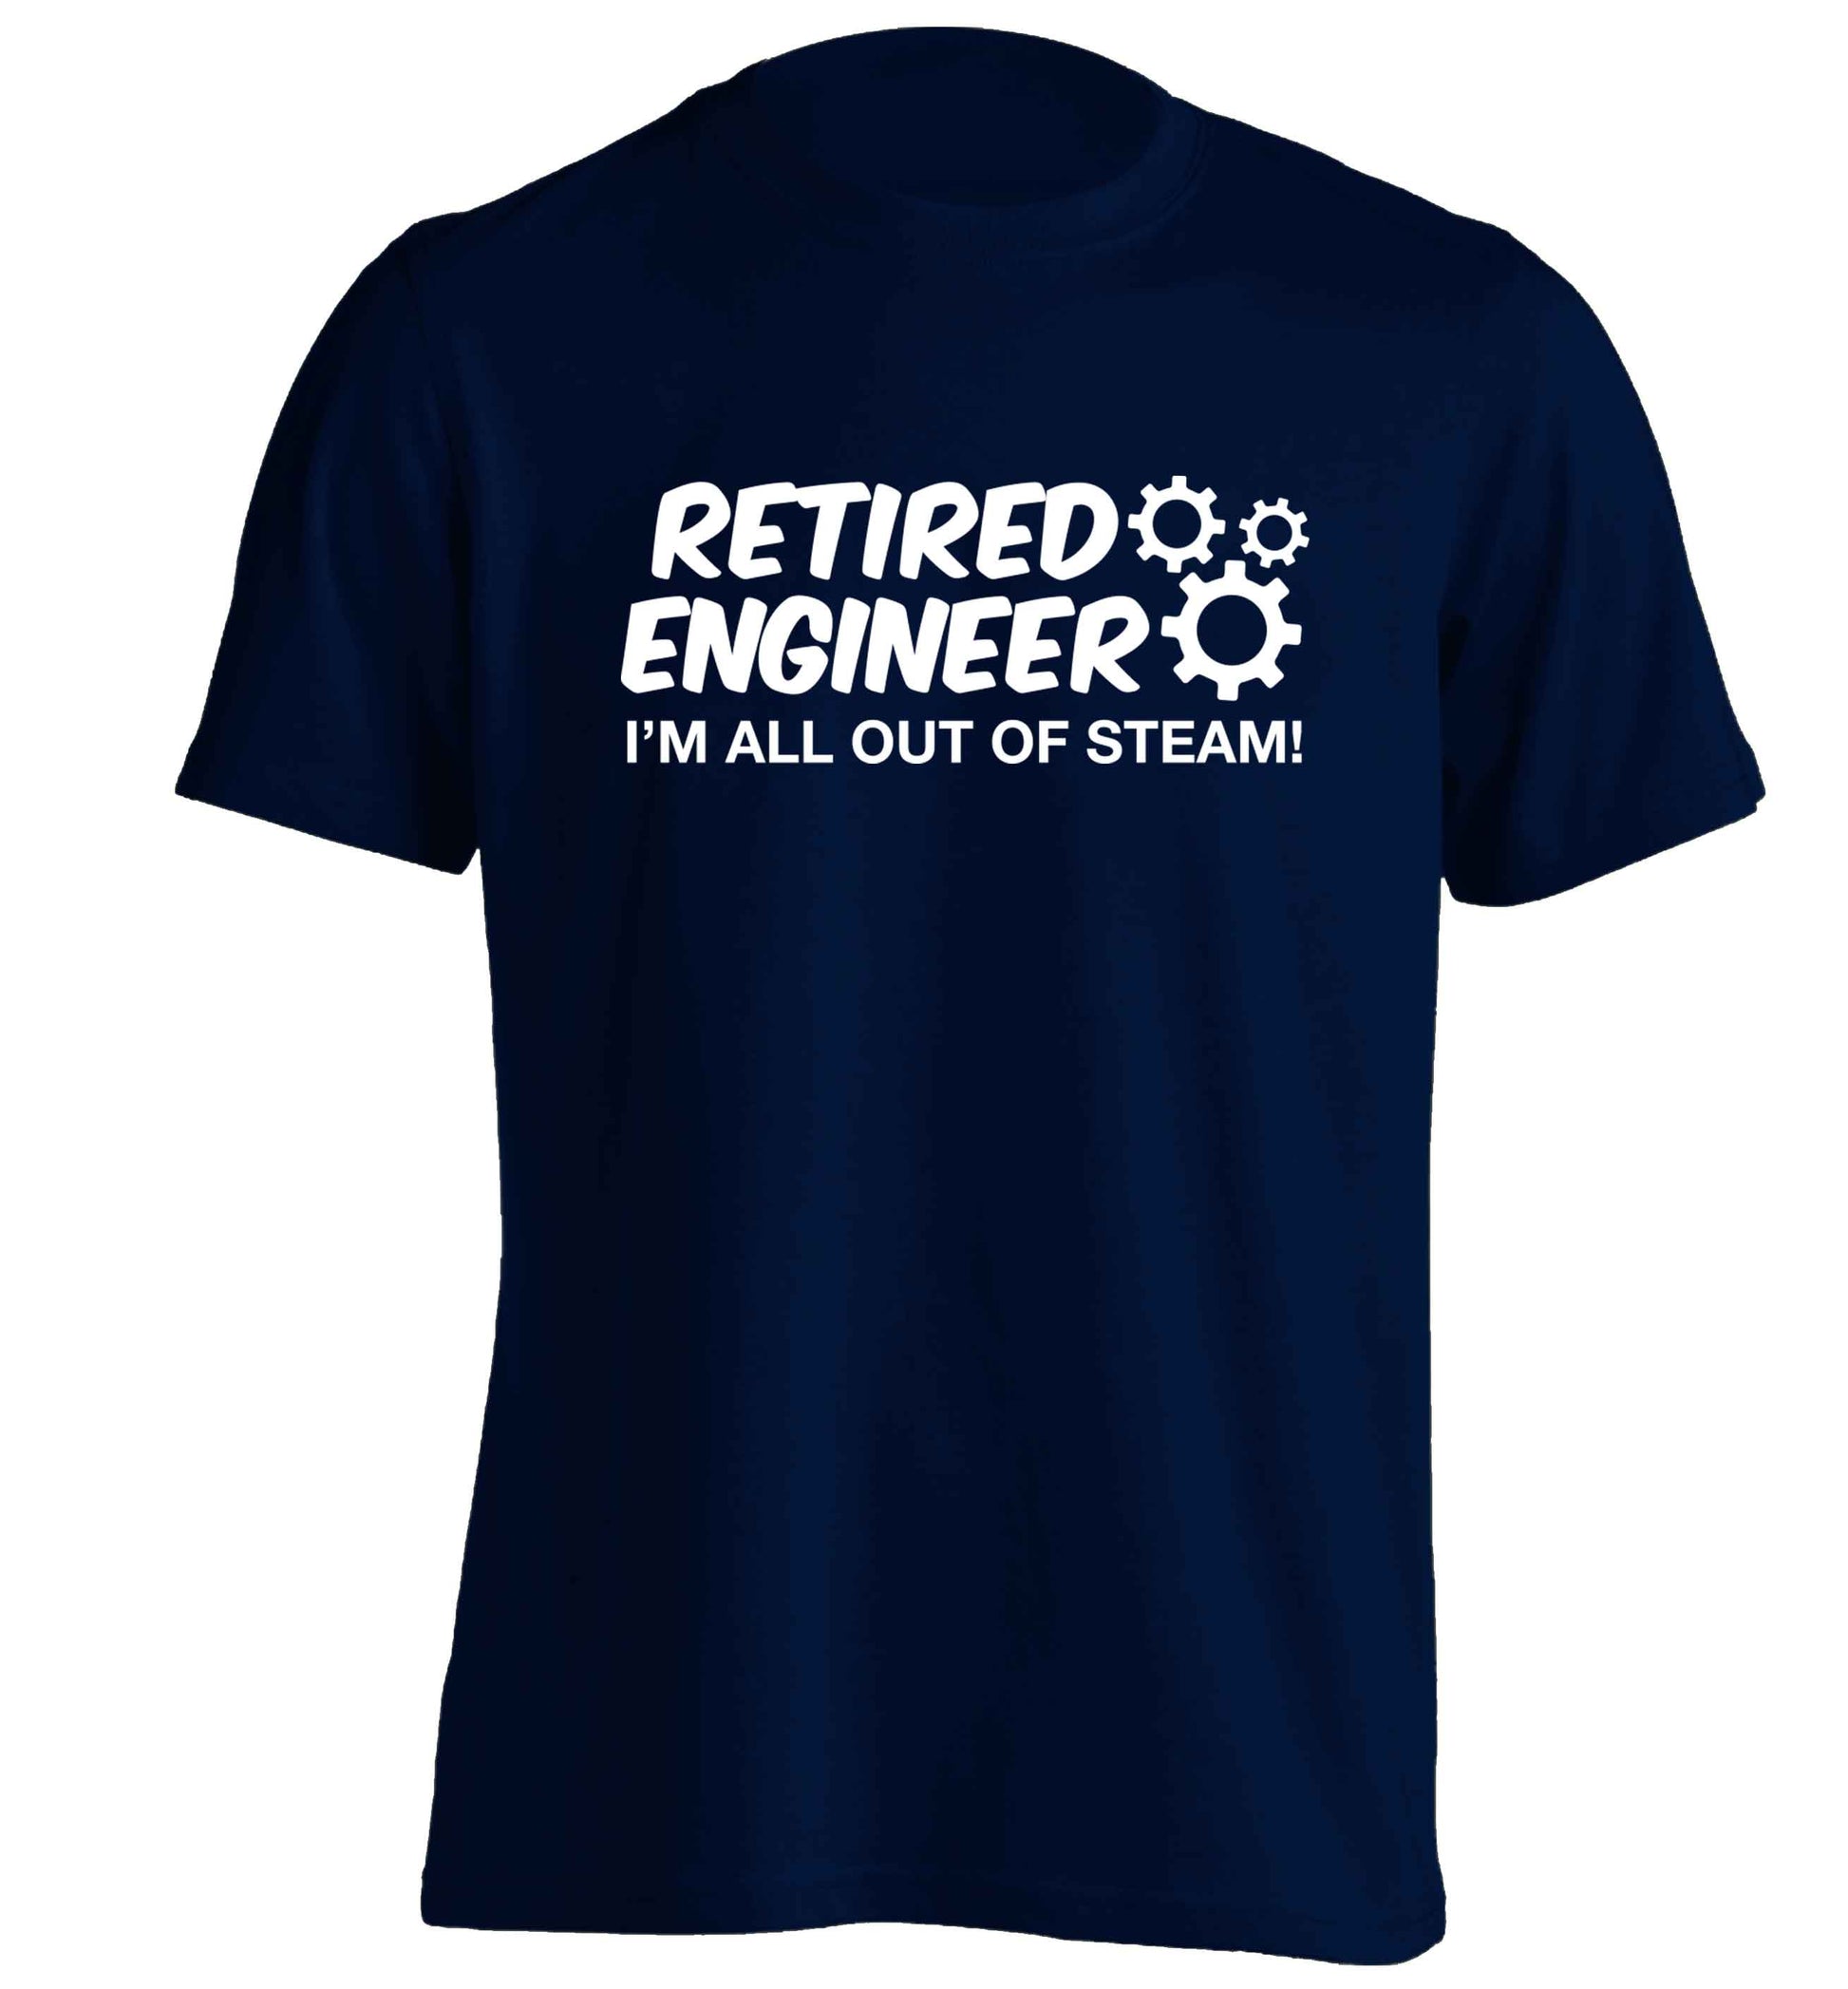 Retired engineer I'm all out of steam adults unisex navy Tshirt 2XL